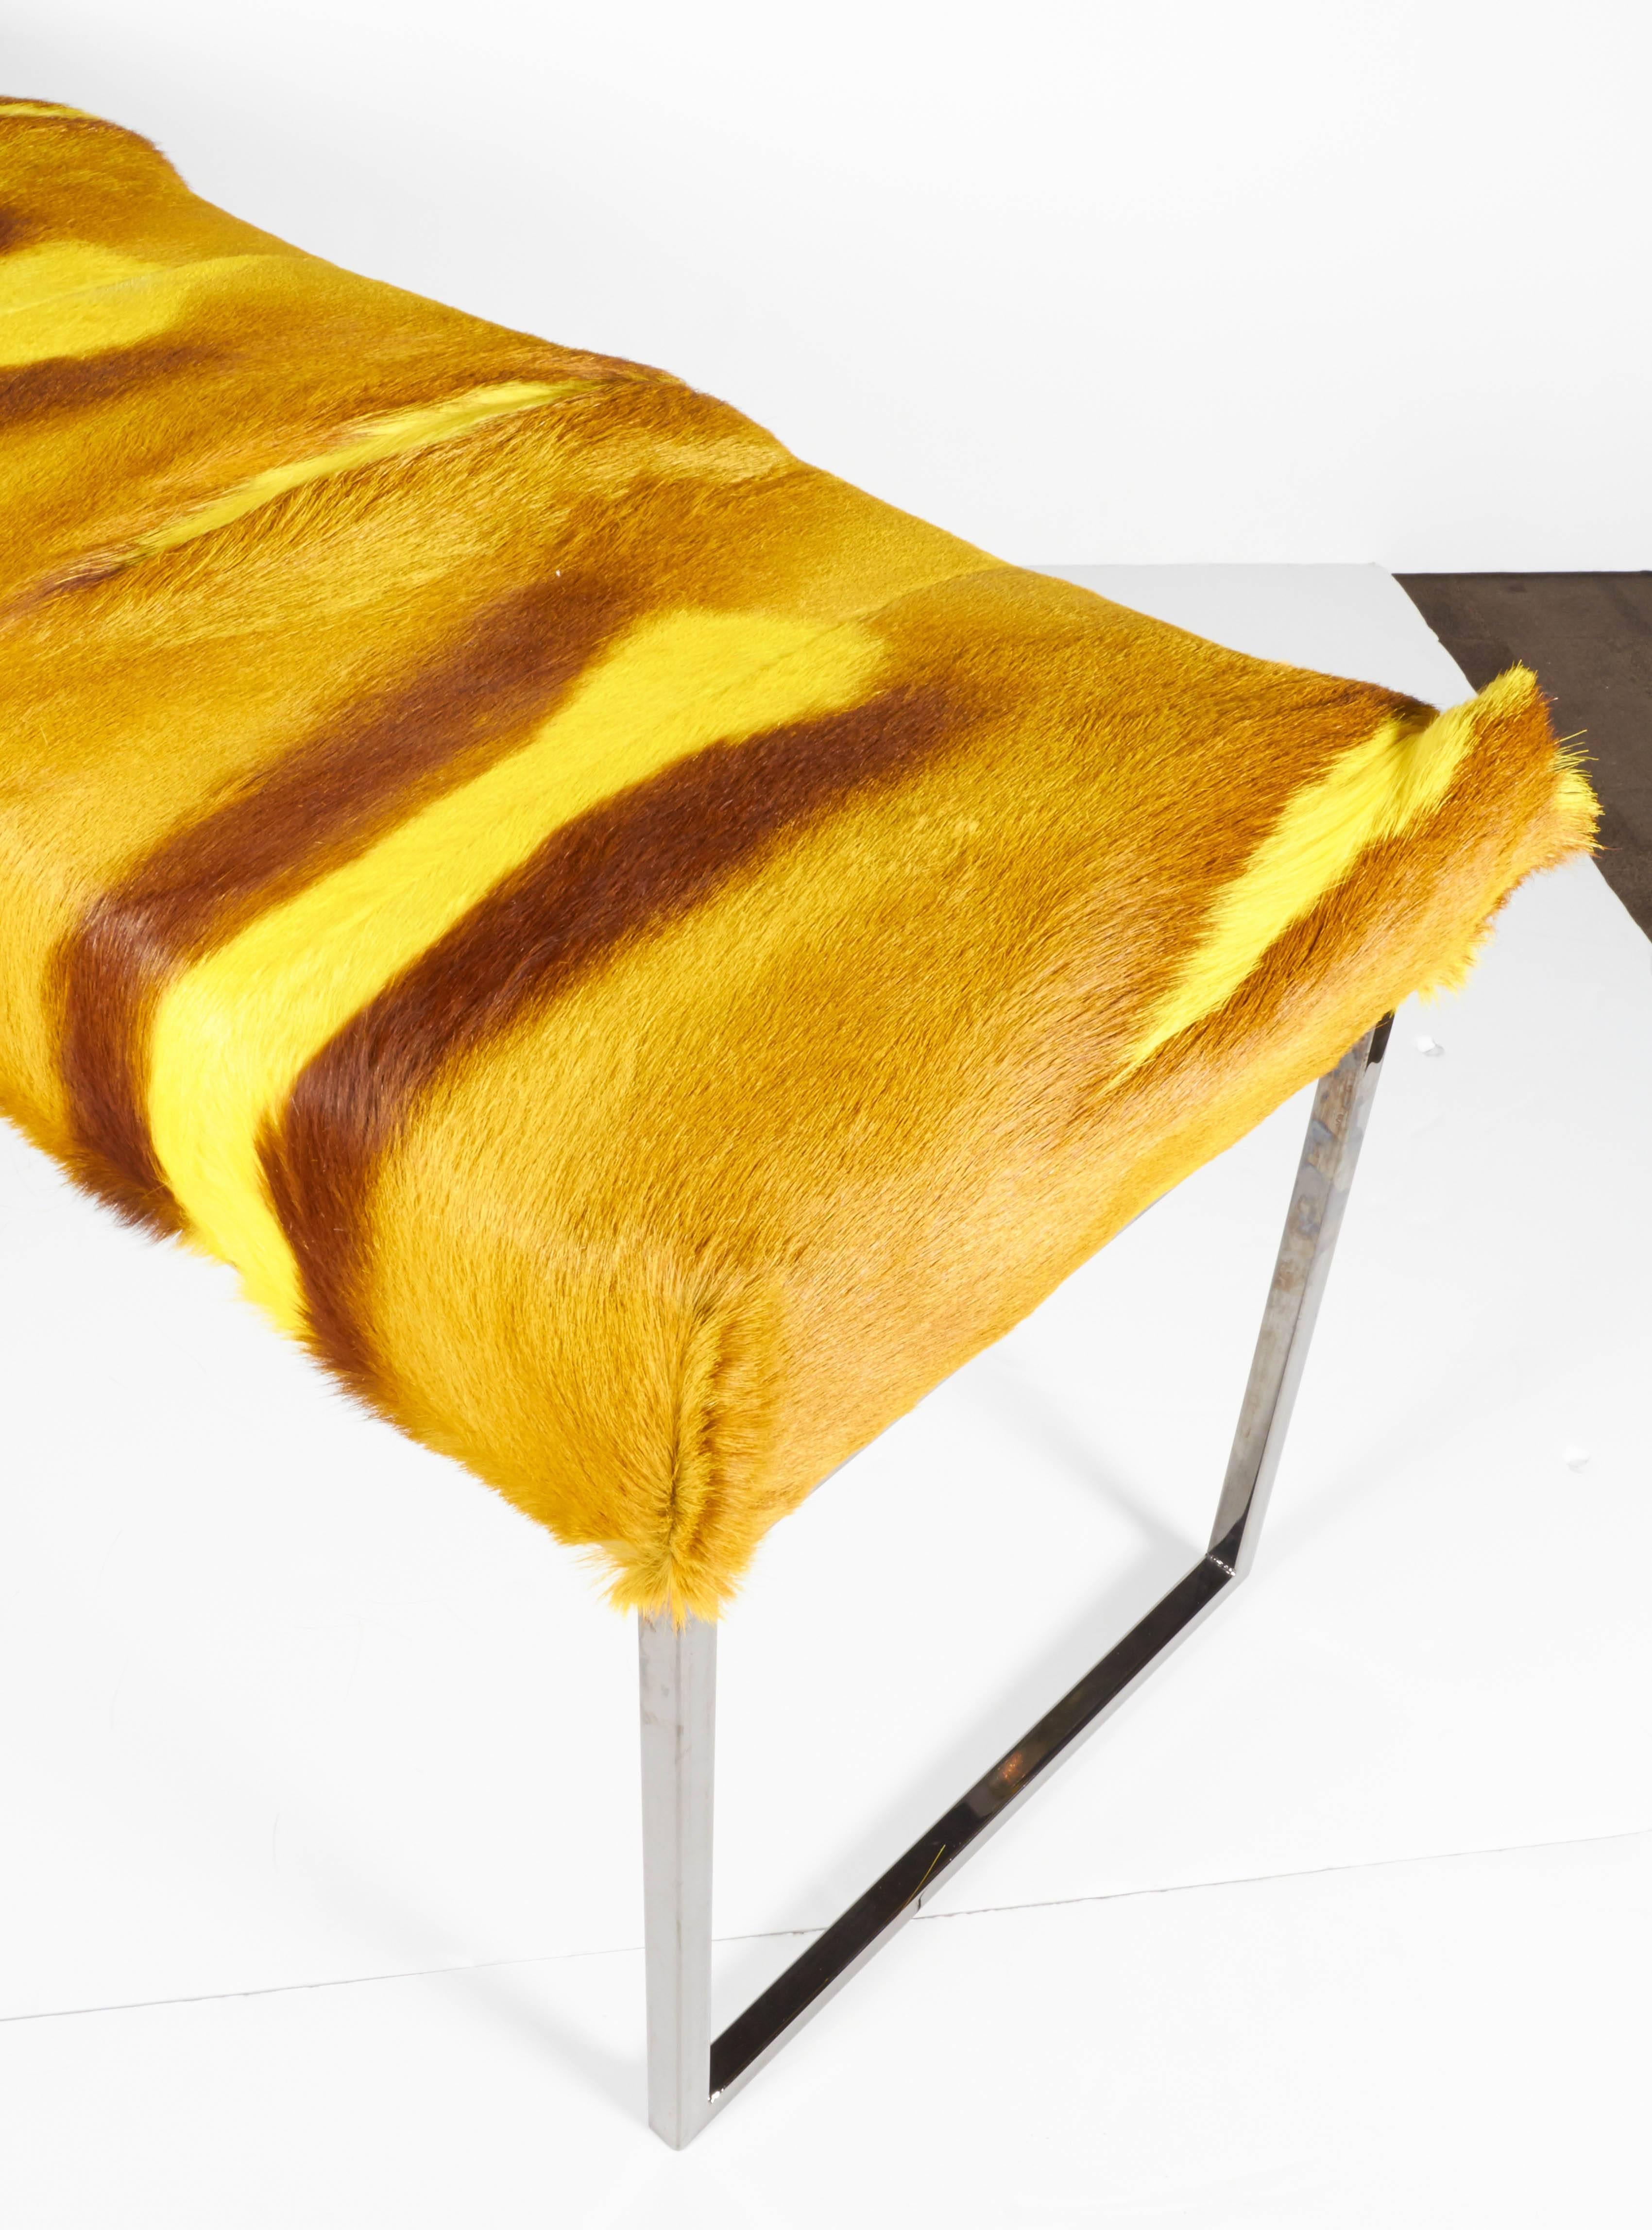 Hand-Crafted Bespoke Bench in Exotic Springbok Fur in Vibrant Yellow